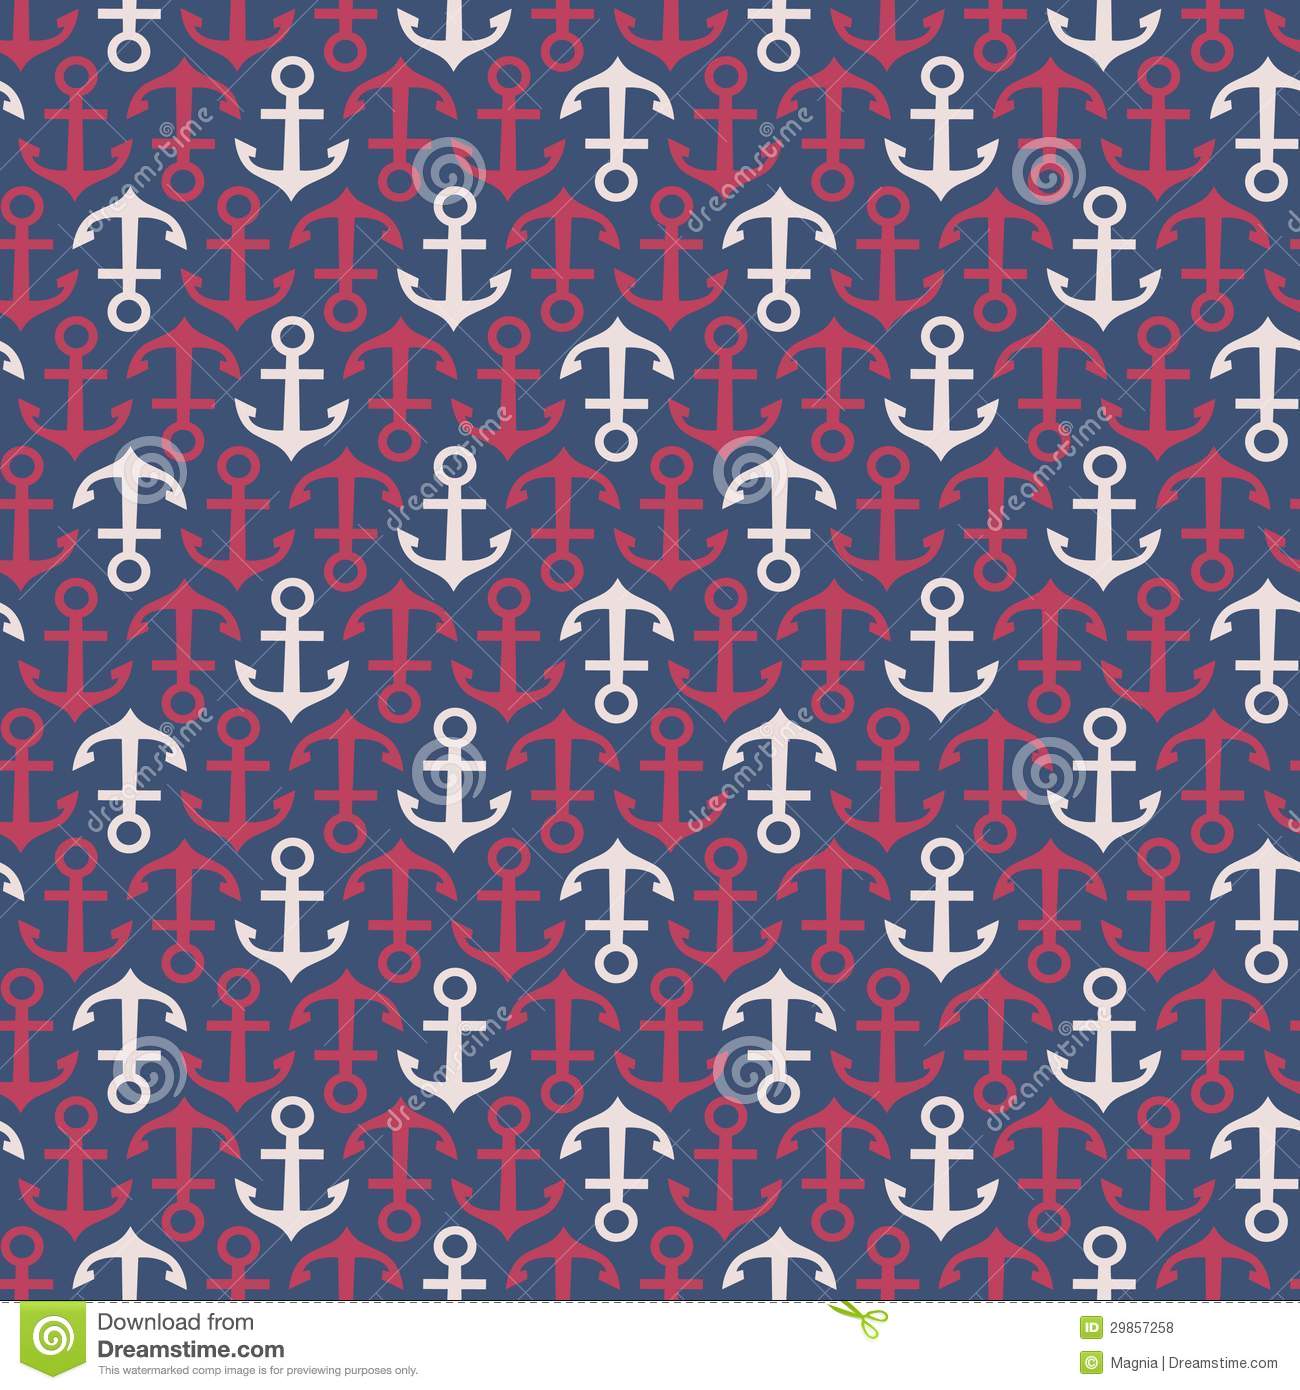 Anchor with Chevron Pattern